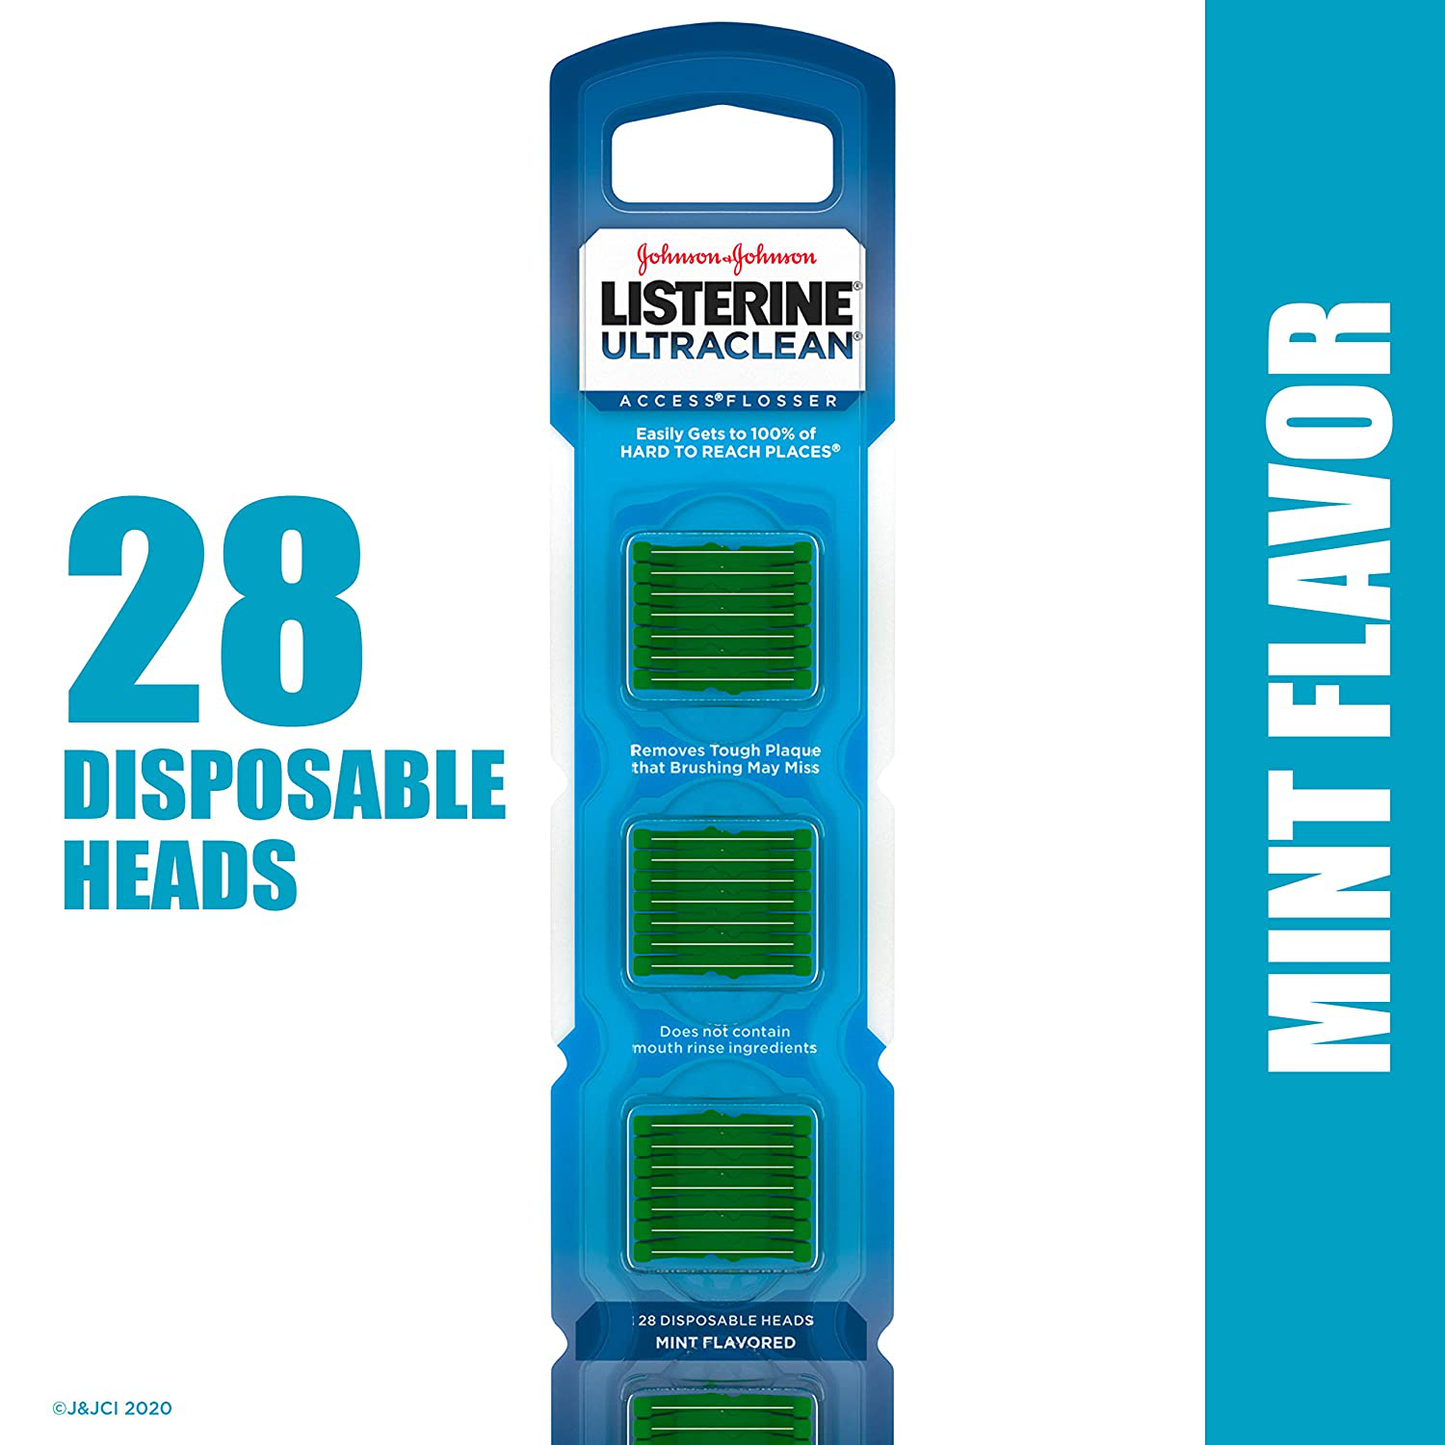 Listerine Ultraclean Access Disposable Snap-On Accessories